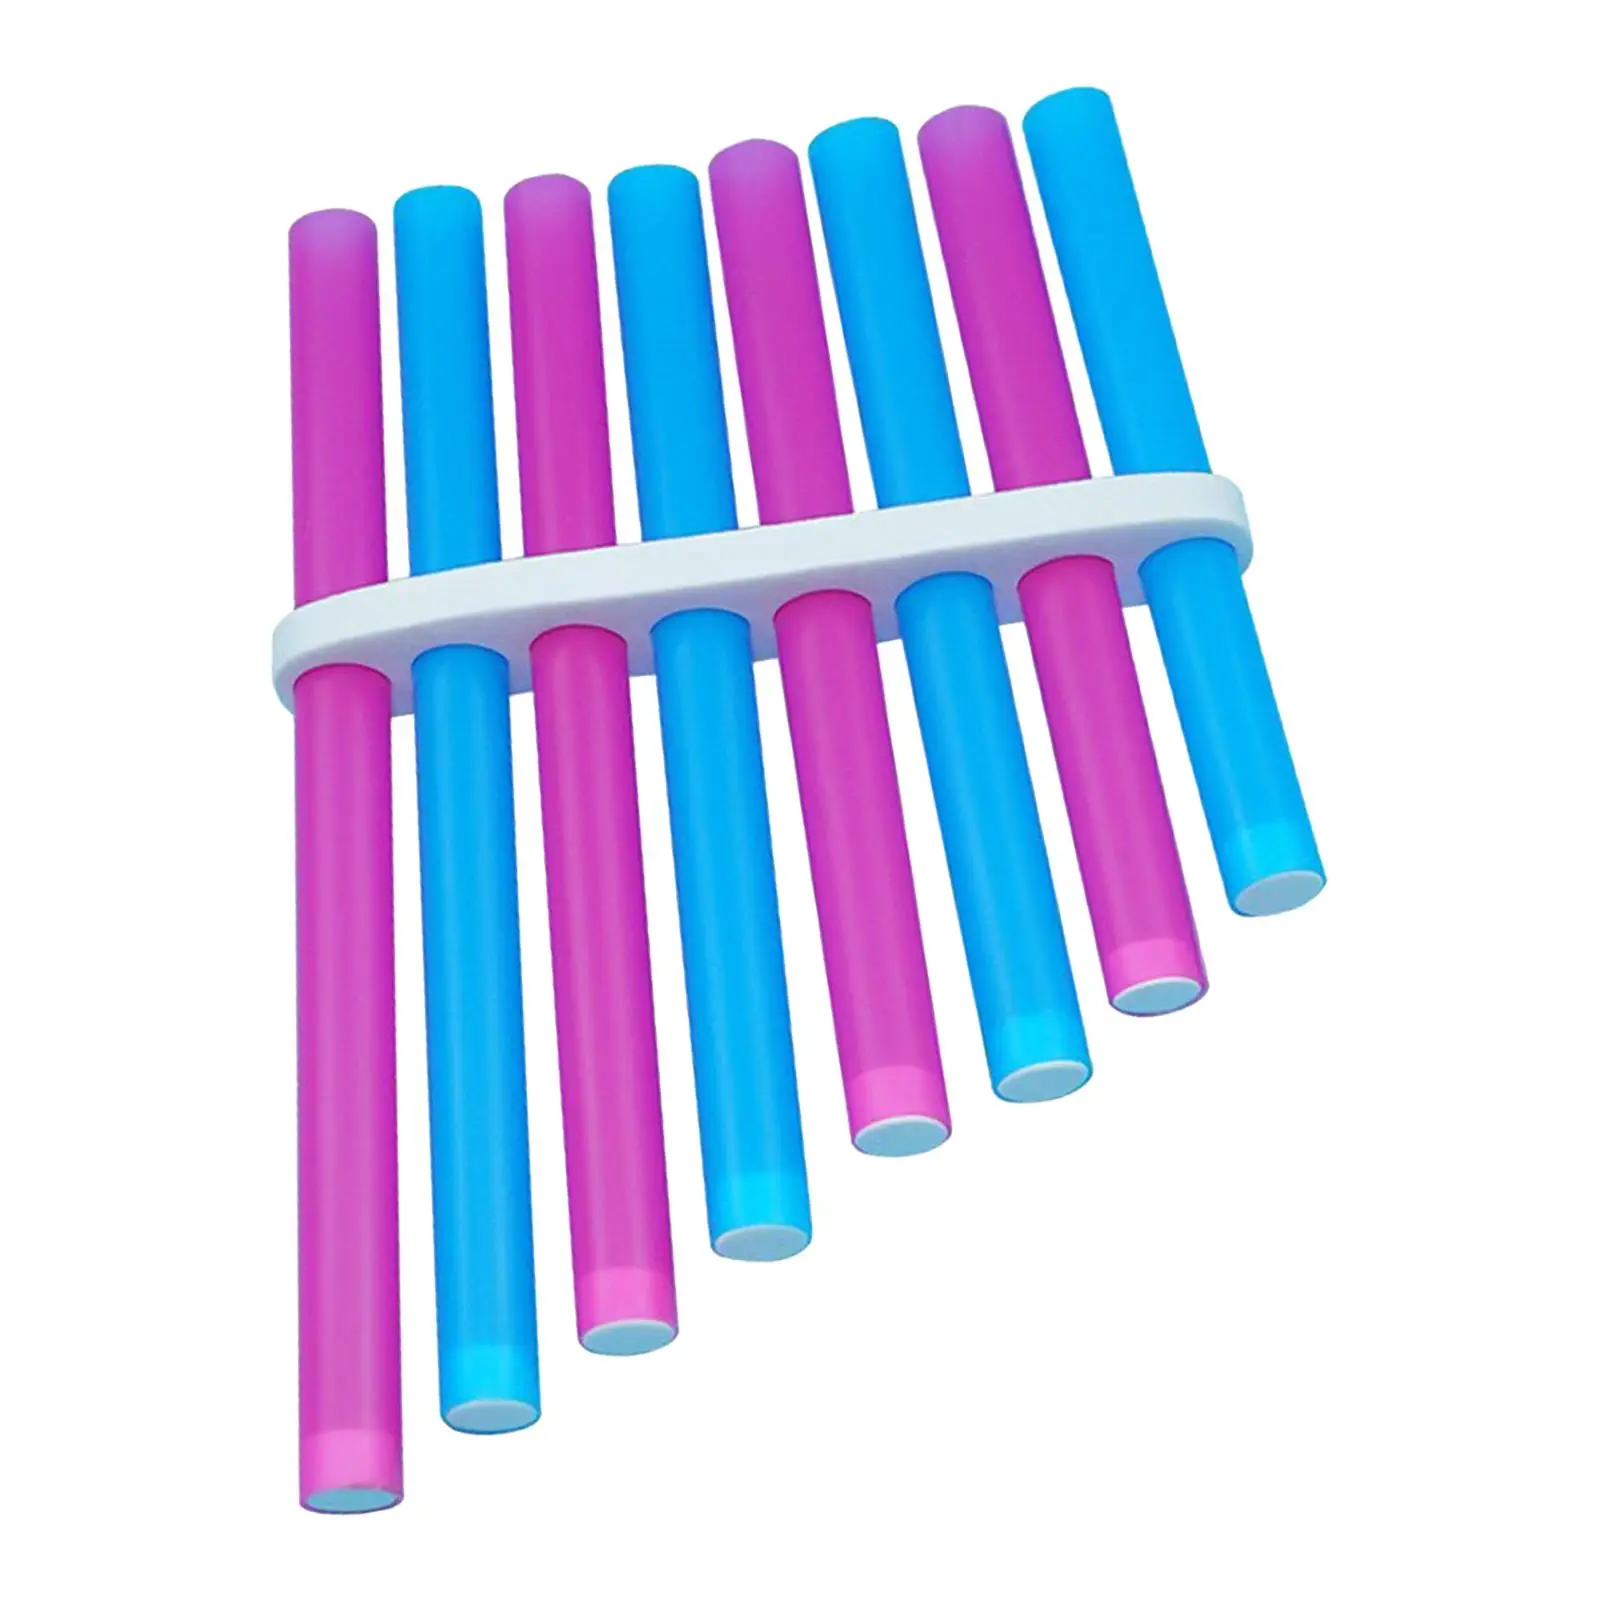 Homemade Pan Flute Chinese Traditional Musical Instrument DIY Educational Model for Creative Gift Teaching Aids Party Favor